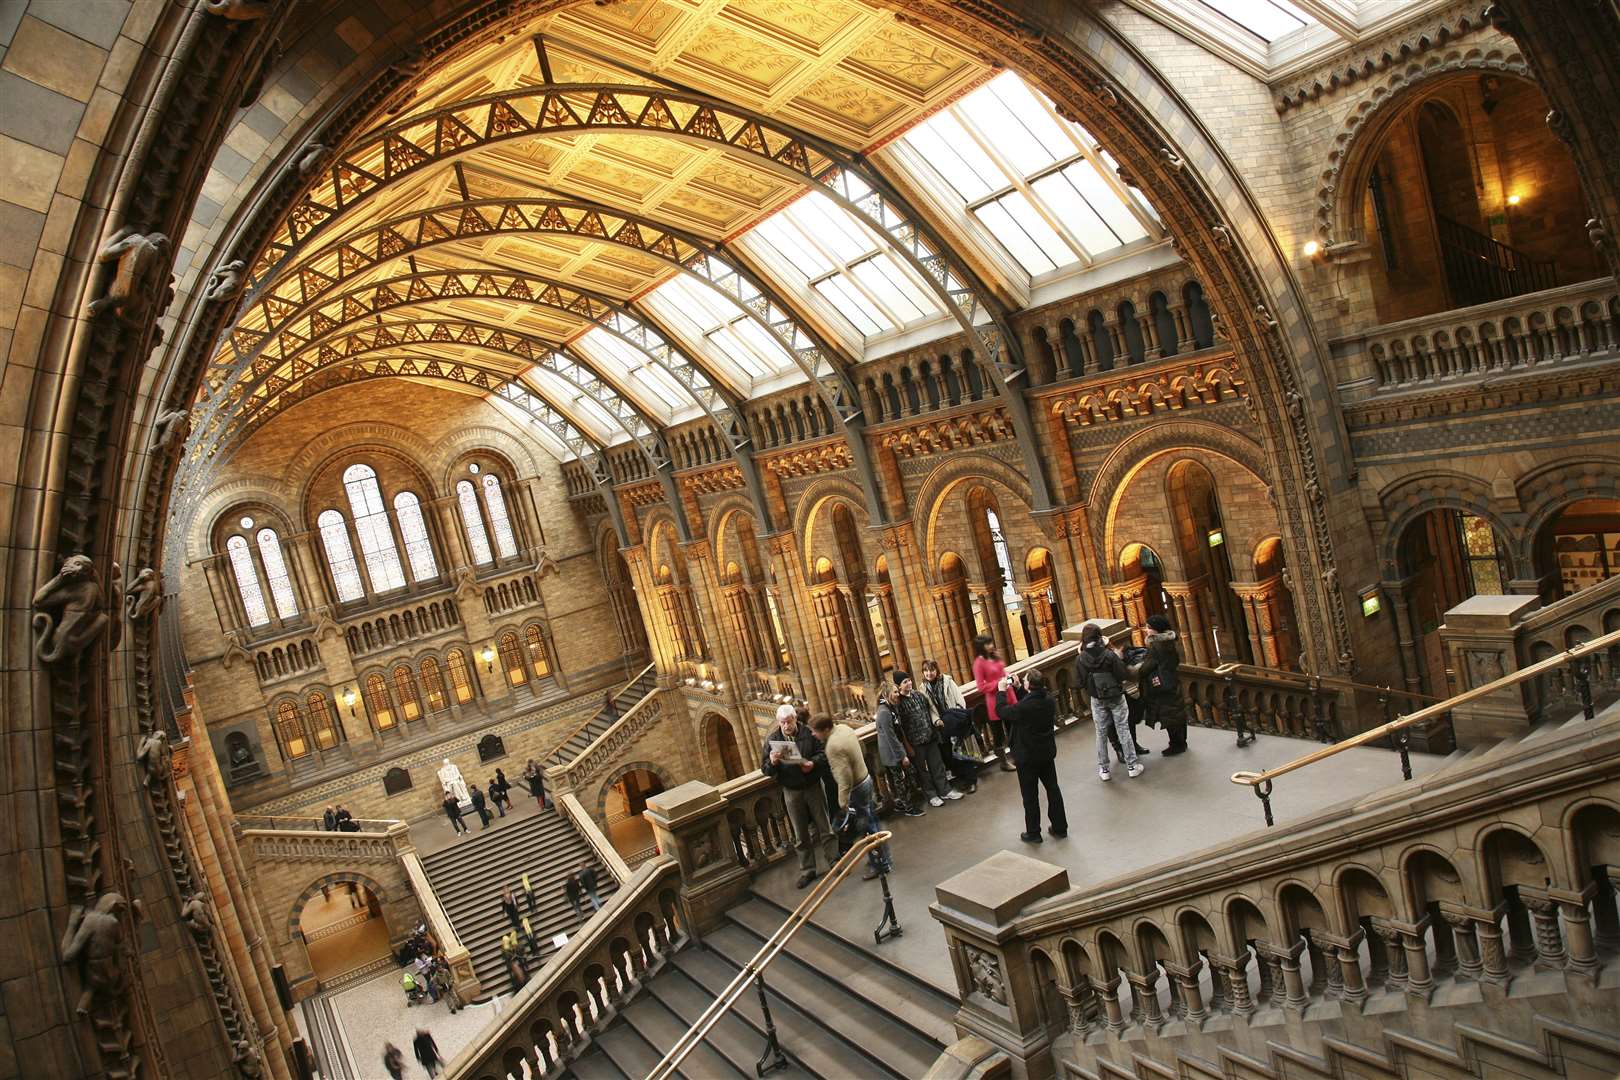 The Natural History Museum is currently closed to visitors